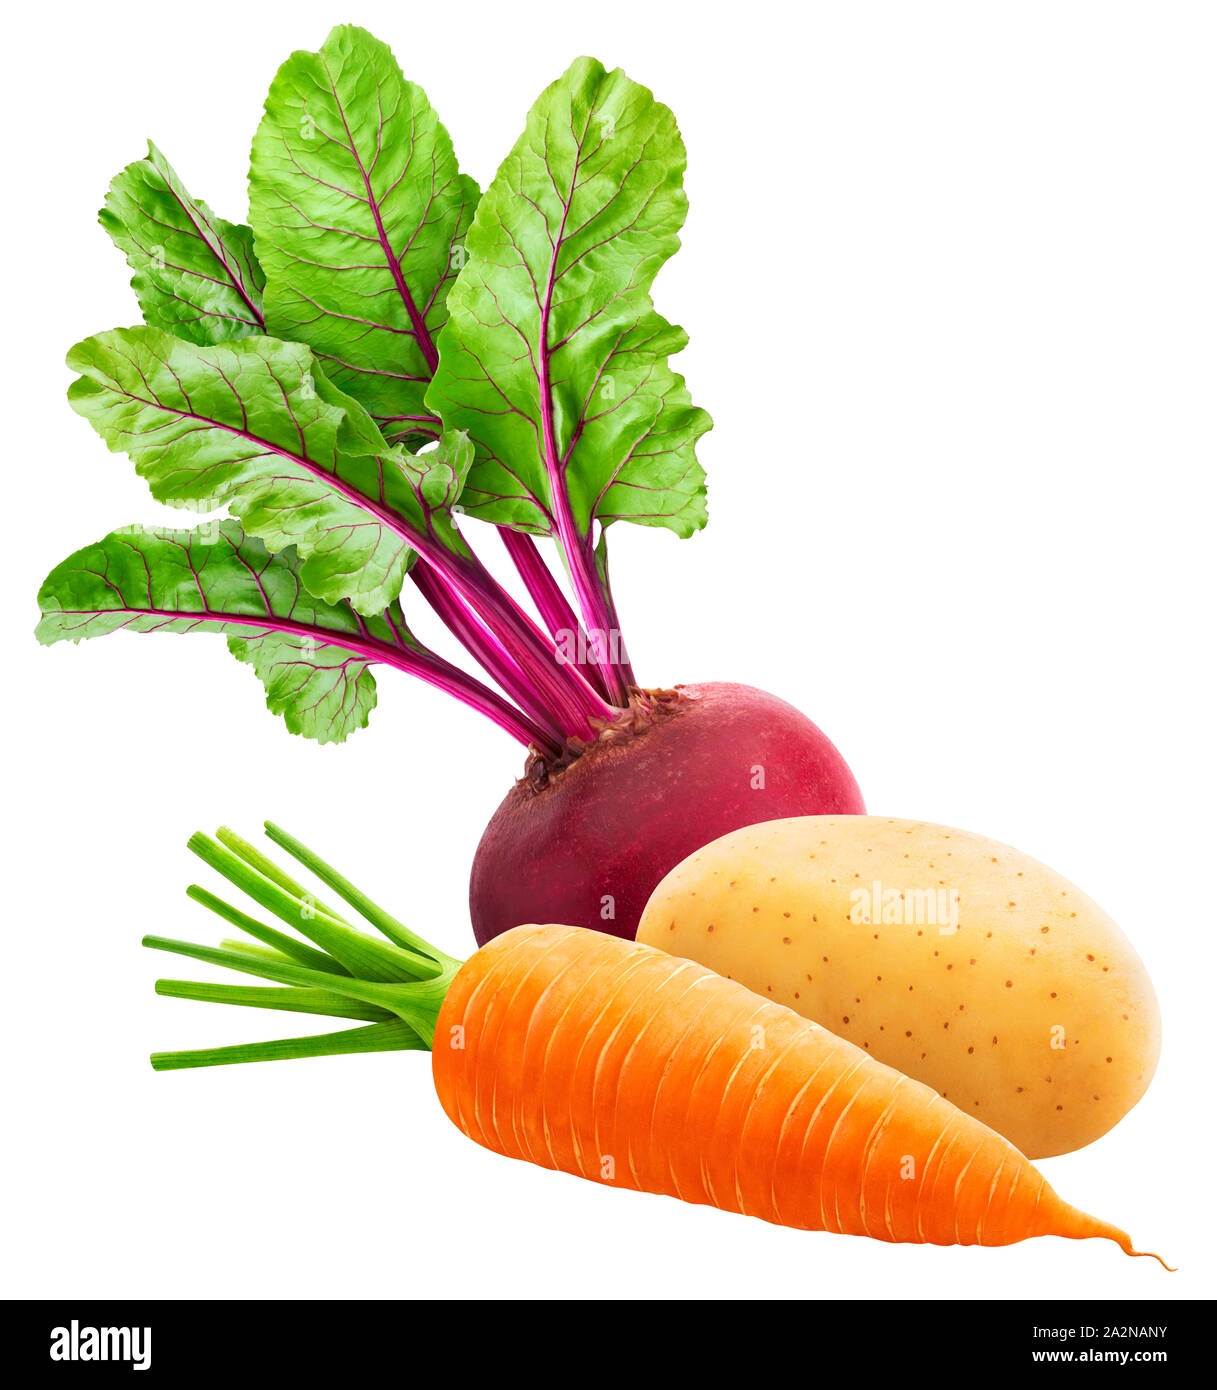 https://c8.alamy.com/comp/2A2NANY/fresh-vegetables-heap-of-whole-carrot-potato-and-beetroot-isolated-on-white-background-2A2NANY.jpg